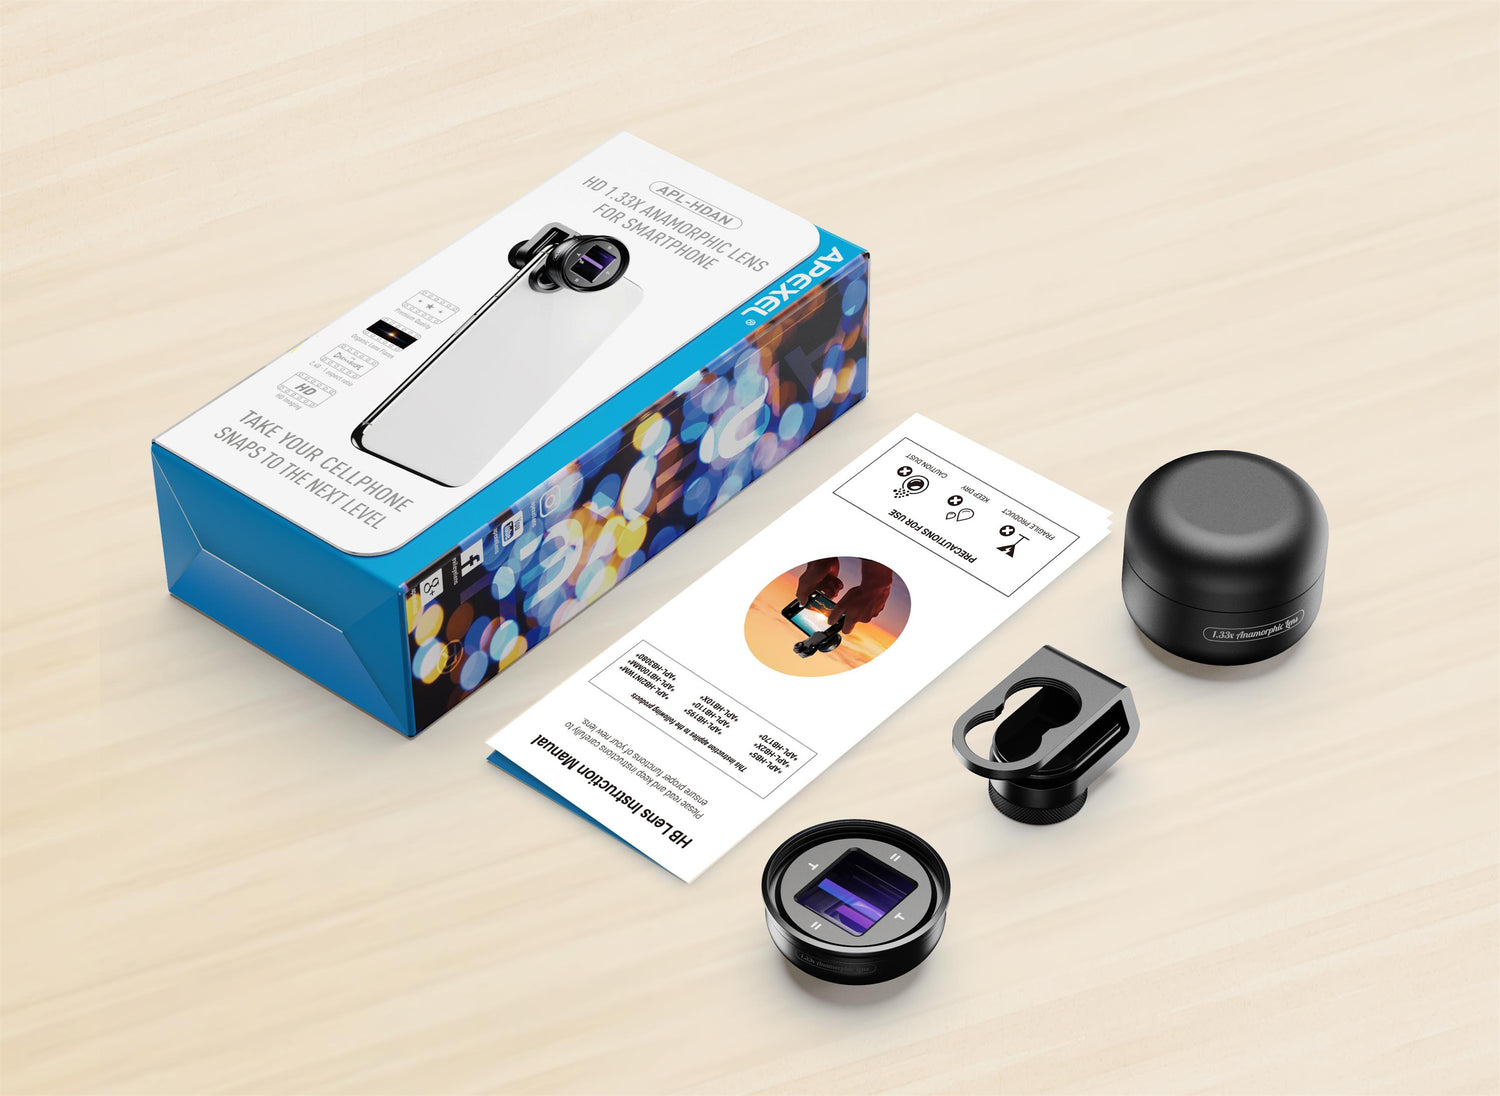 Mobile phone lens packaging with anamorphic and Apexel lens, camera lens and lens box.